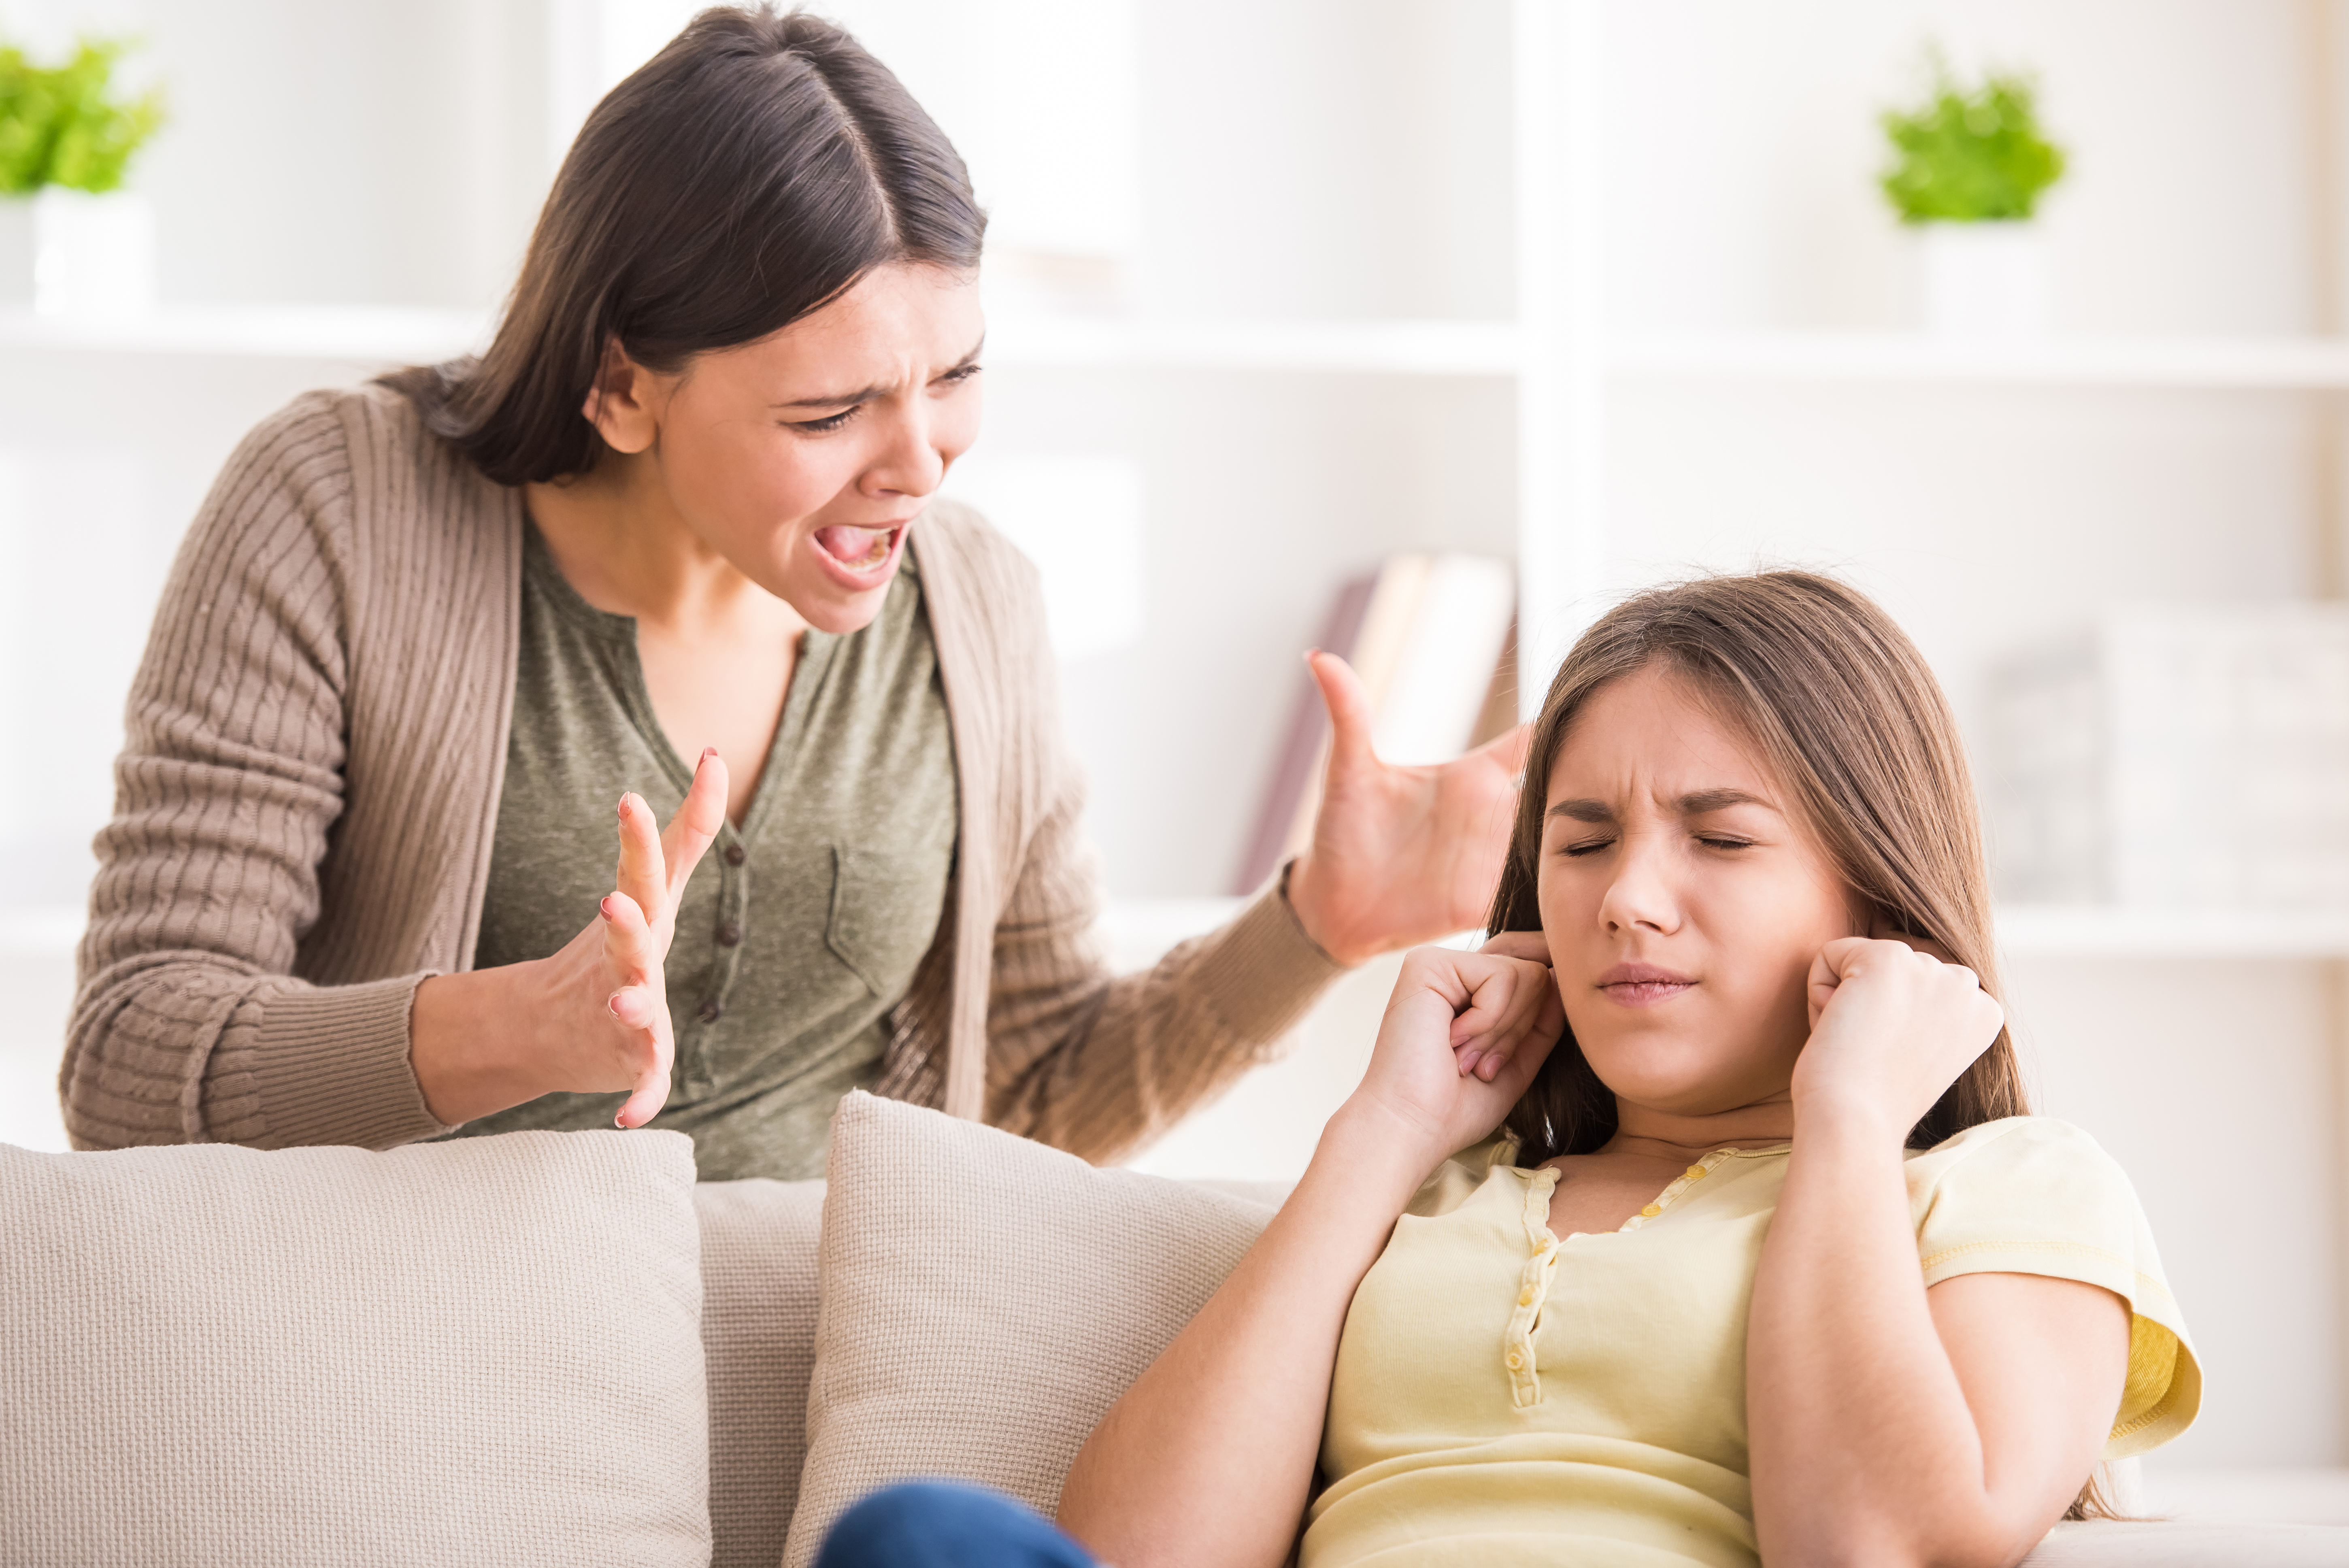 A young woman screams at a teen girl | Source: Shutterstock